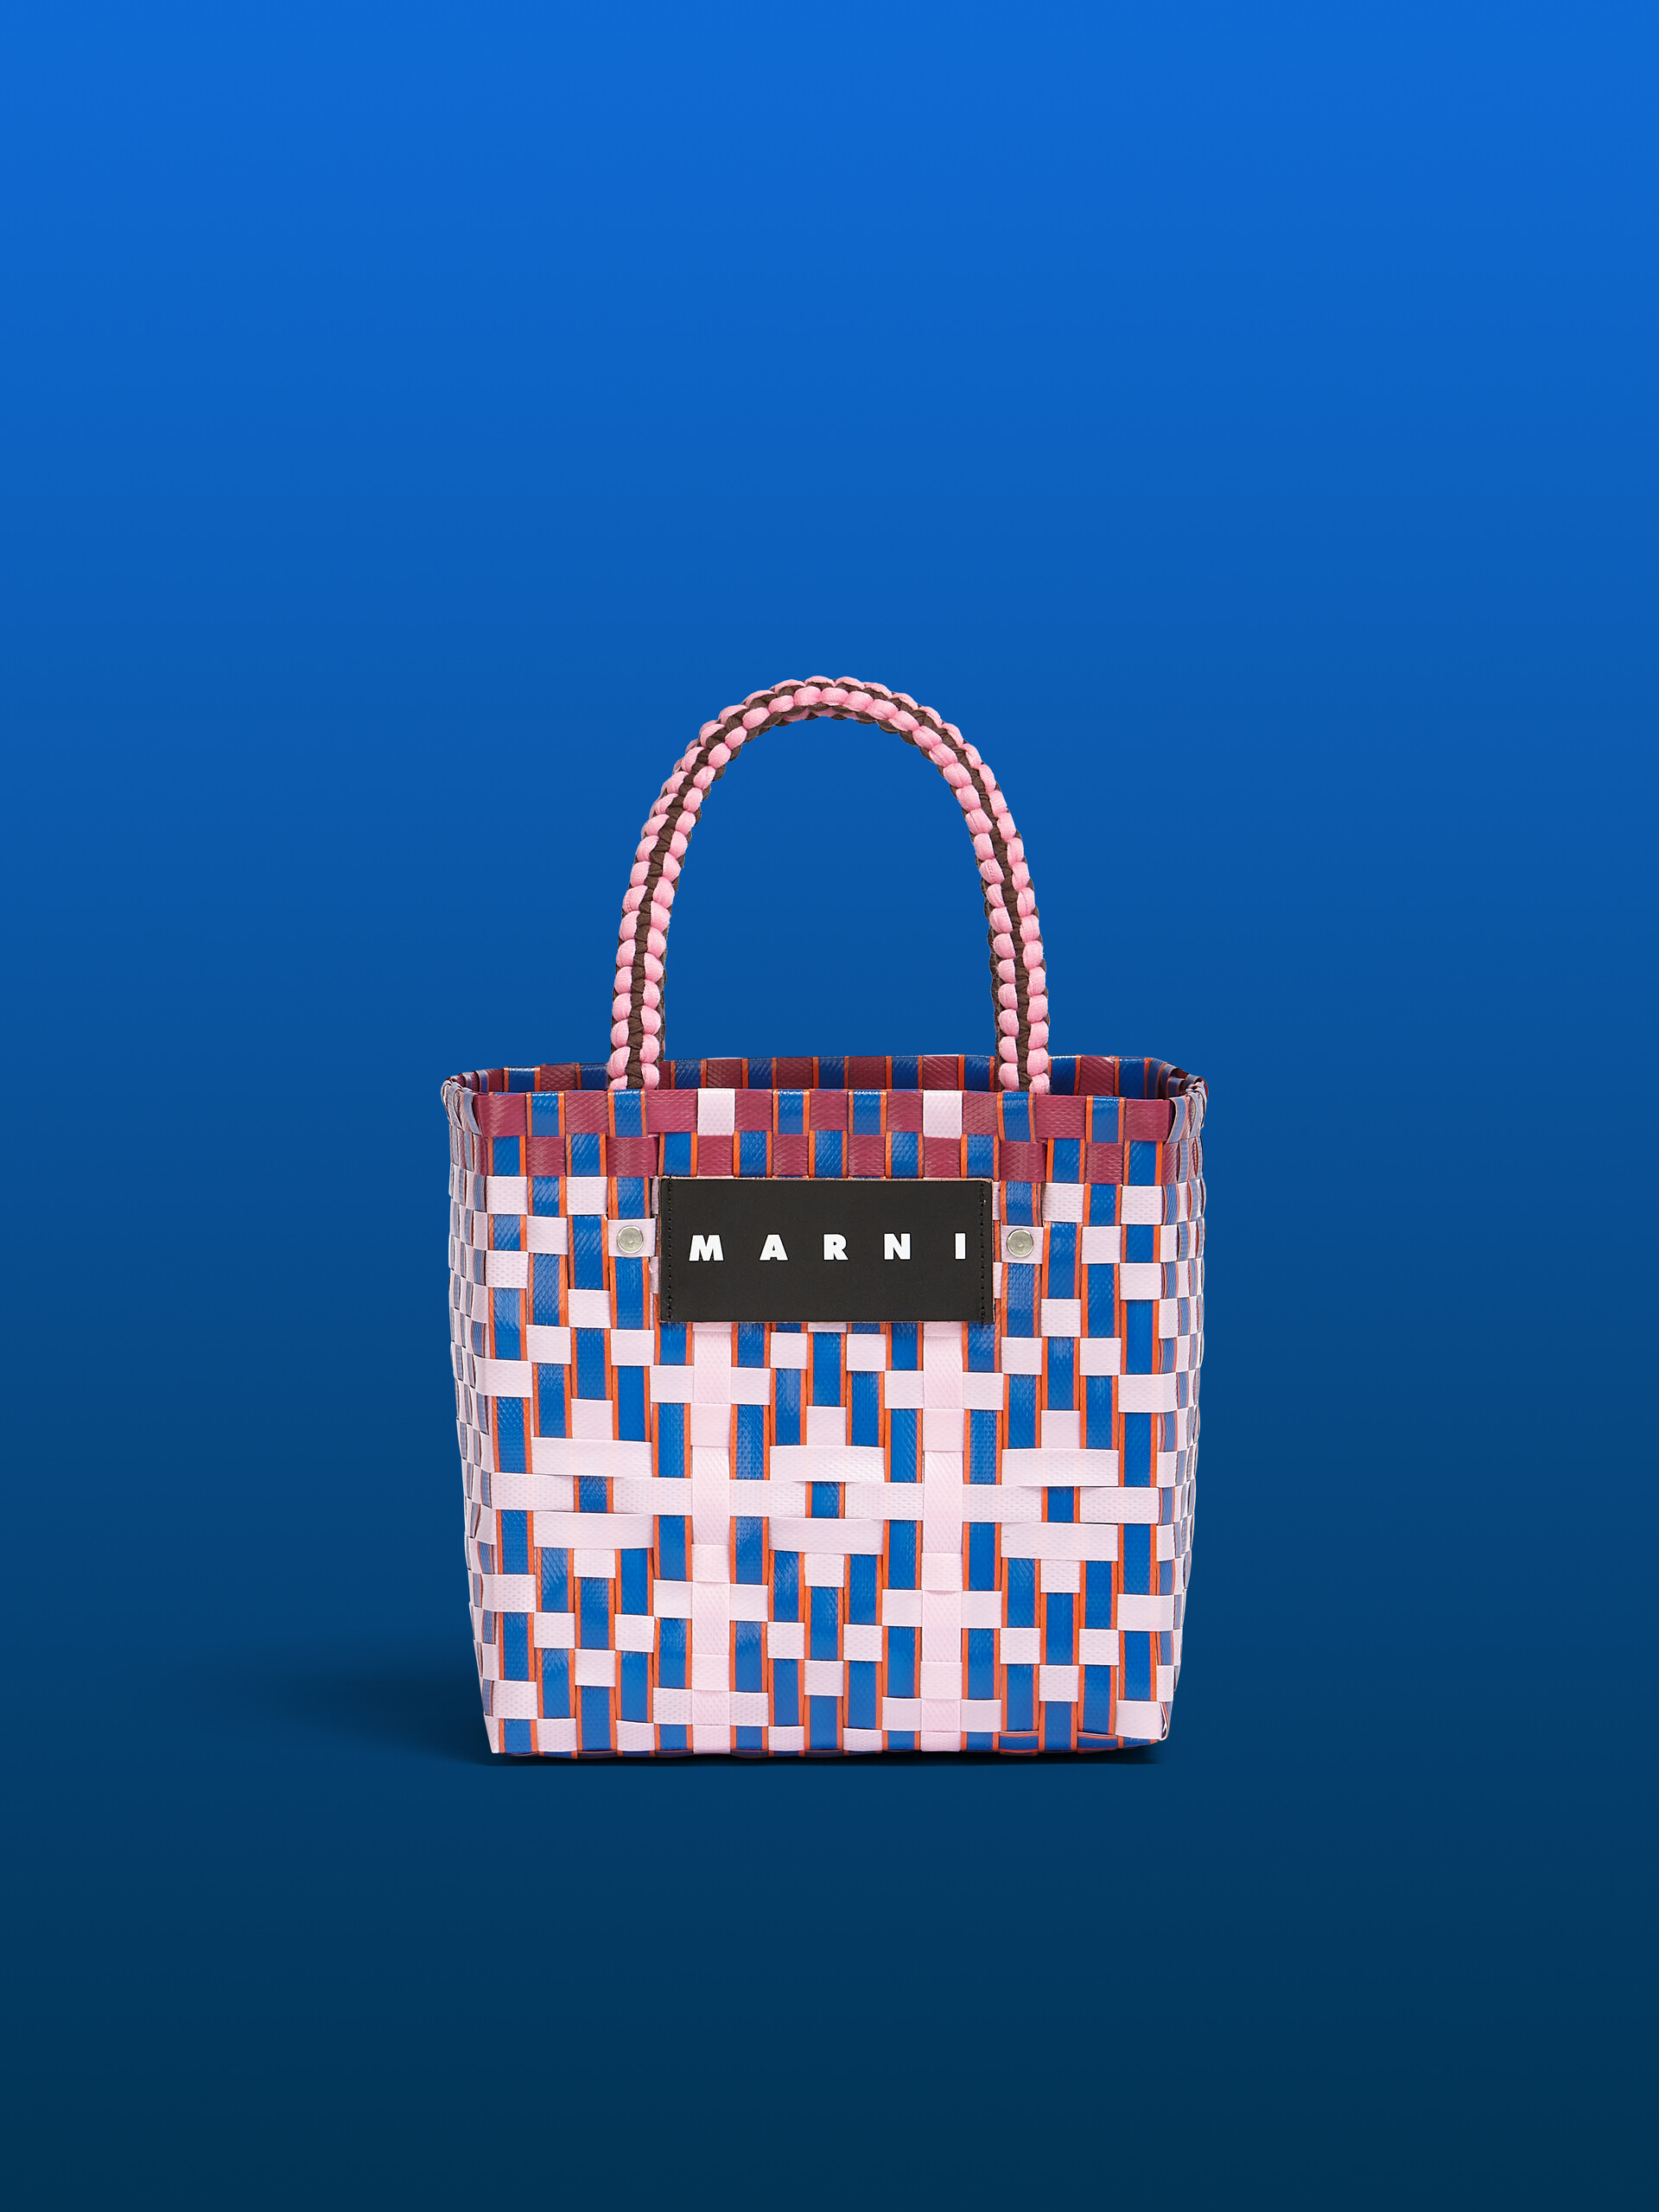 MARNI MARKET BASKET bag in light blue square woven material - Bags - Image 1